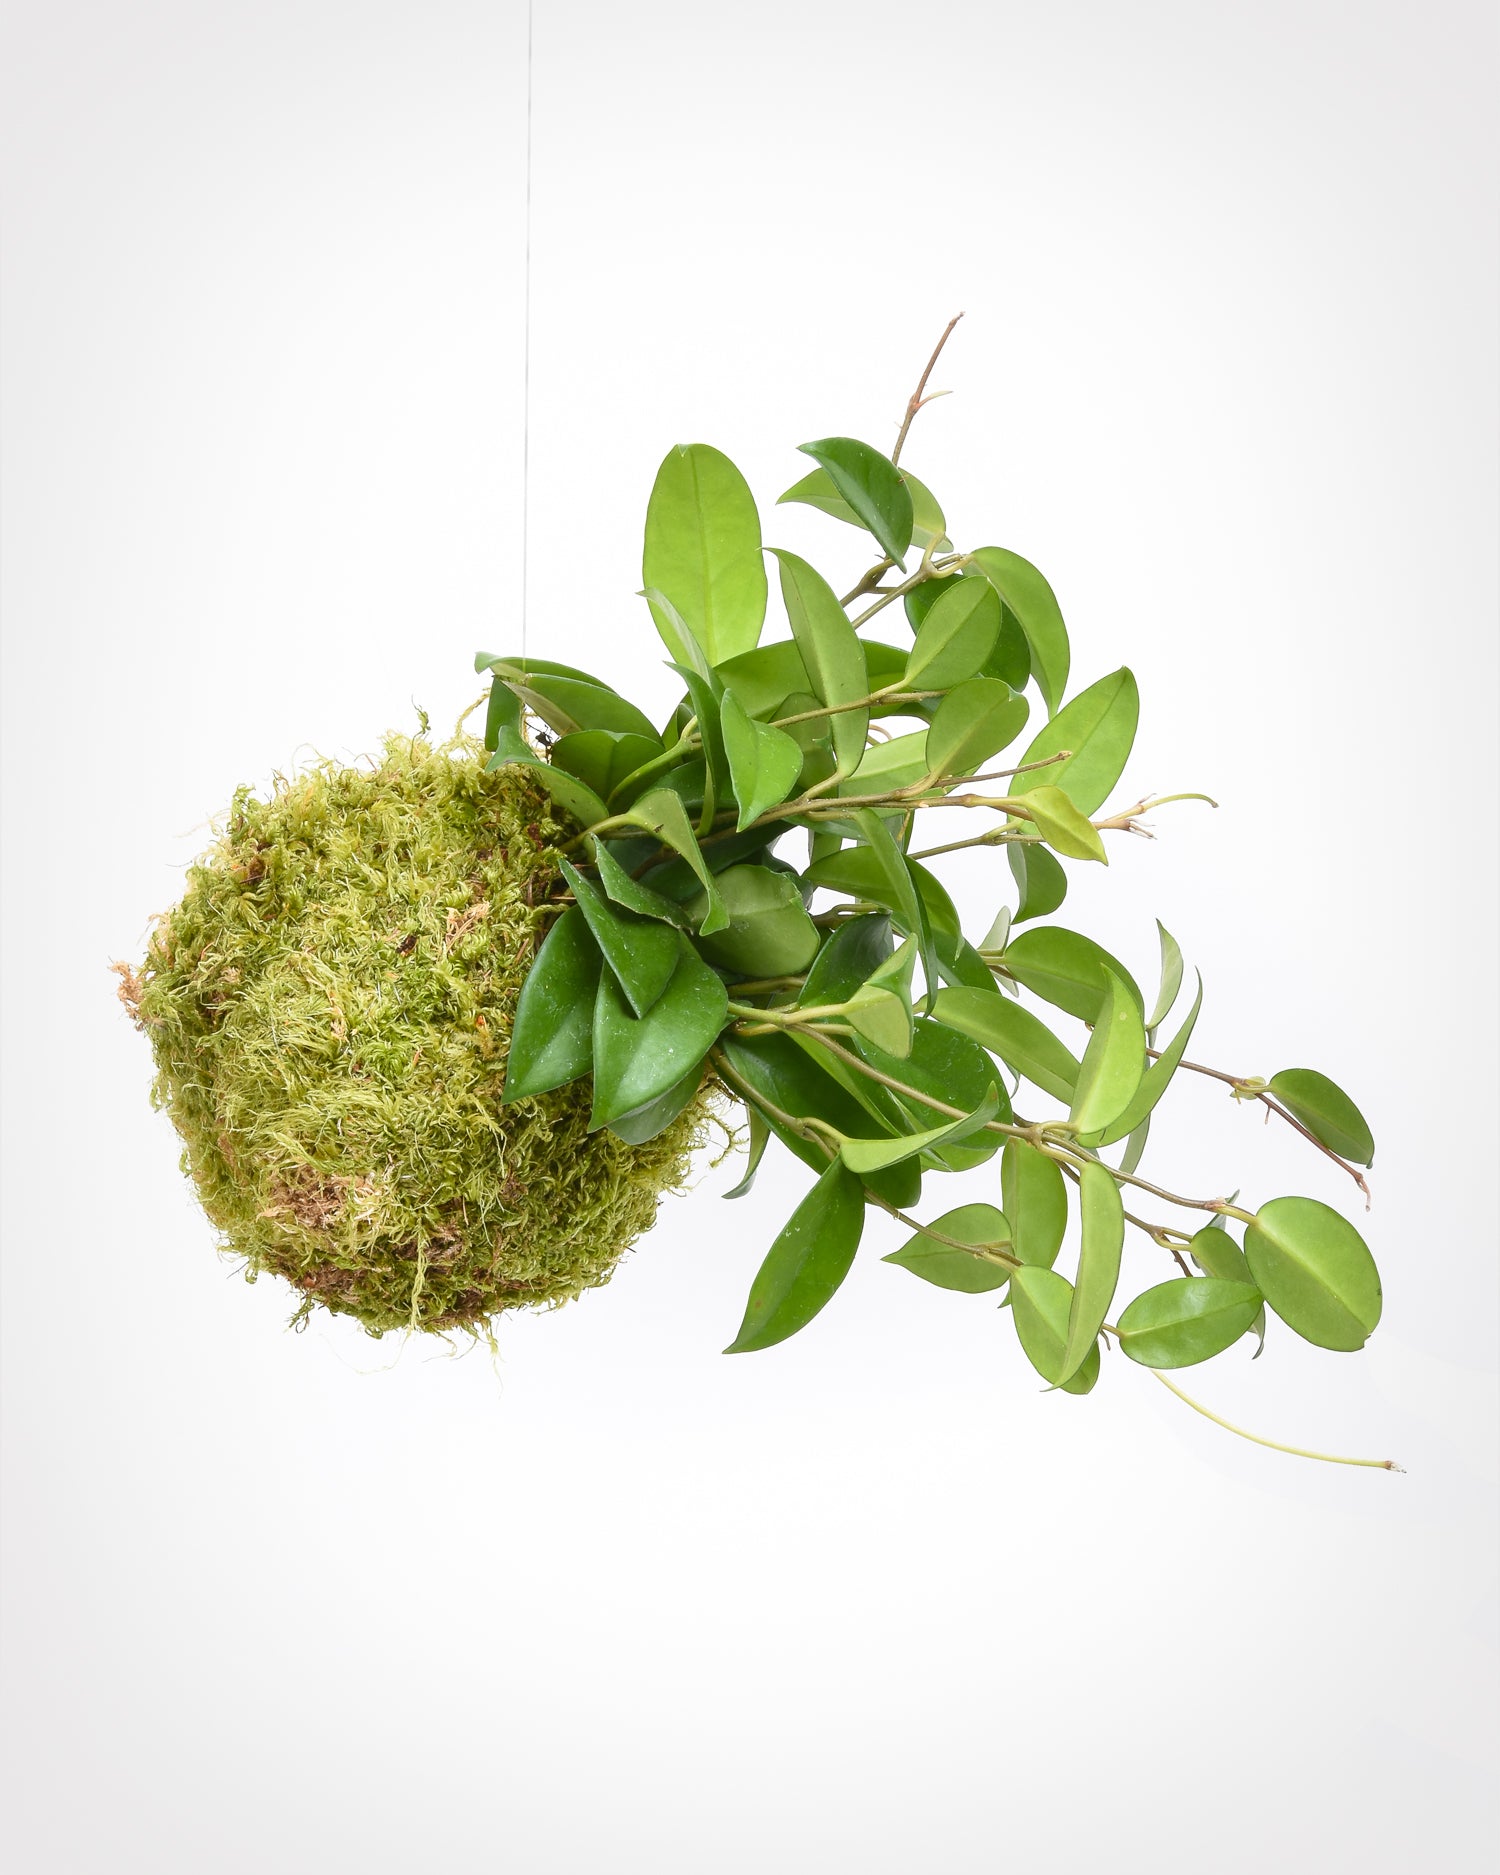 Hanging Hoya carnosa with roots wrapped in bright green sphagnum moss